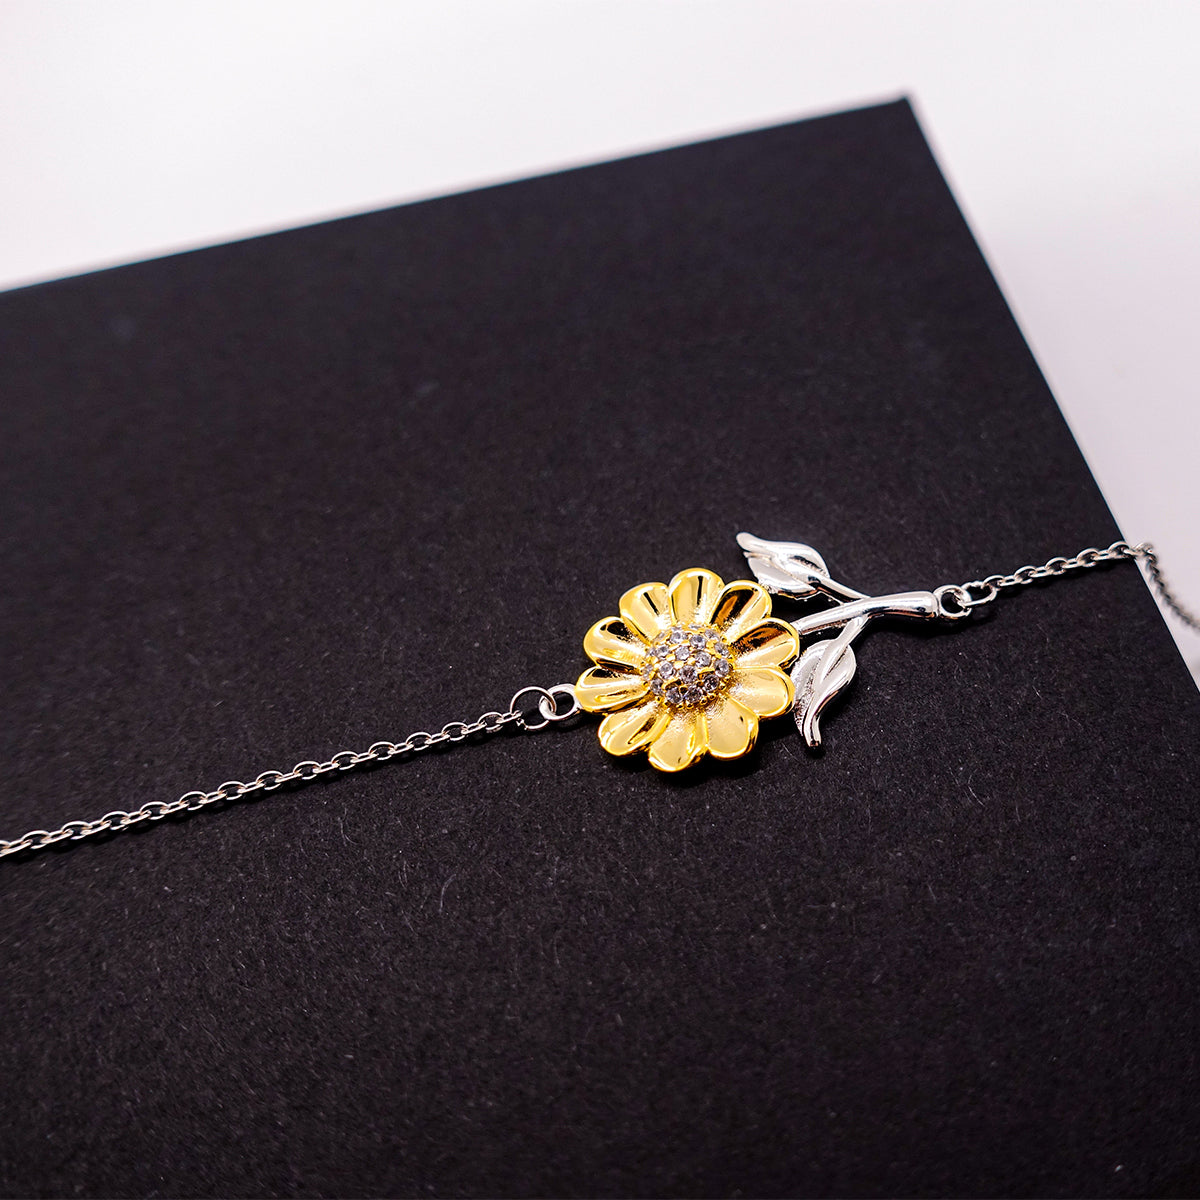 Sunflower Bracelet for Girlfriend - Engraved Reminder of Our Special Love, Confidence, and Hope for Birthday, Holidays, or Any Occasion